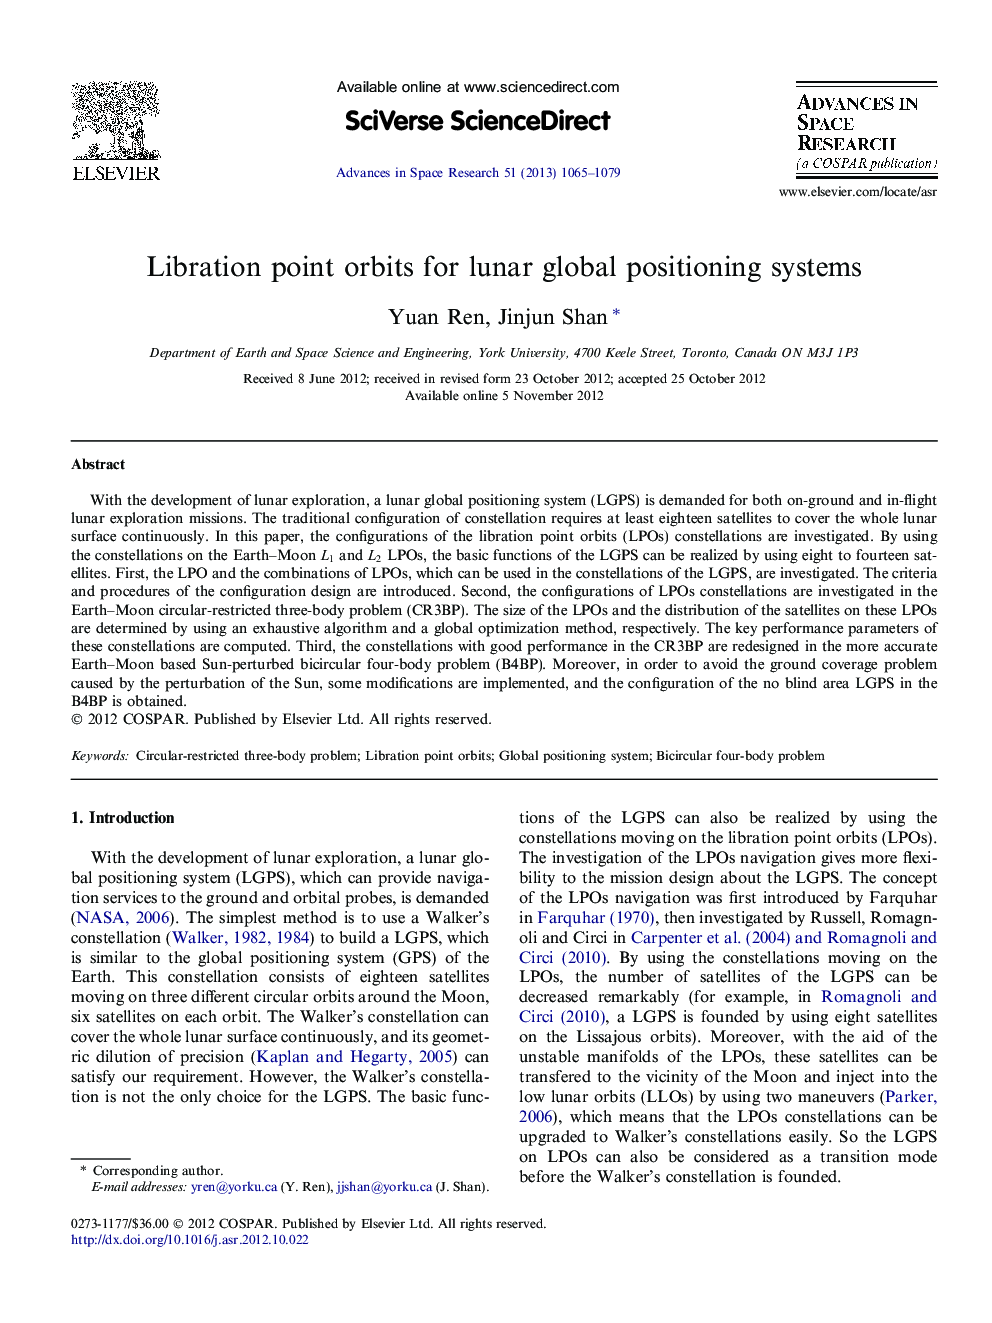 Libration point orbits for lunar global positioning systems